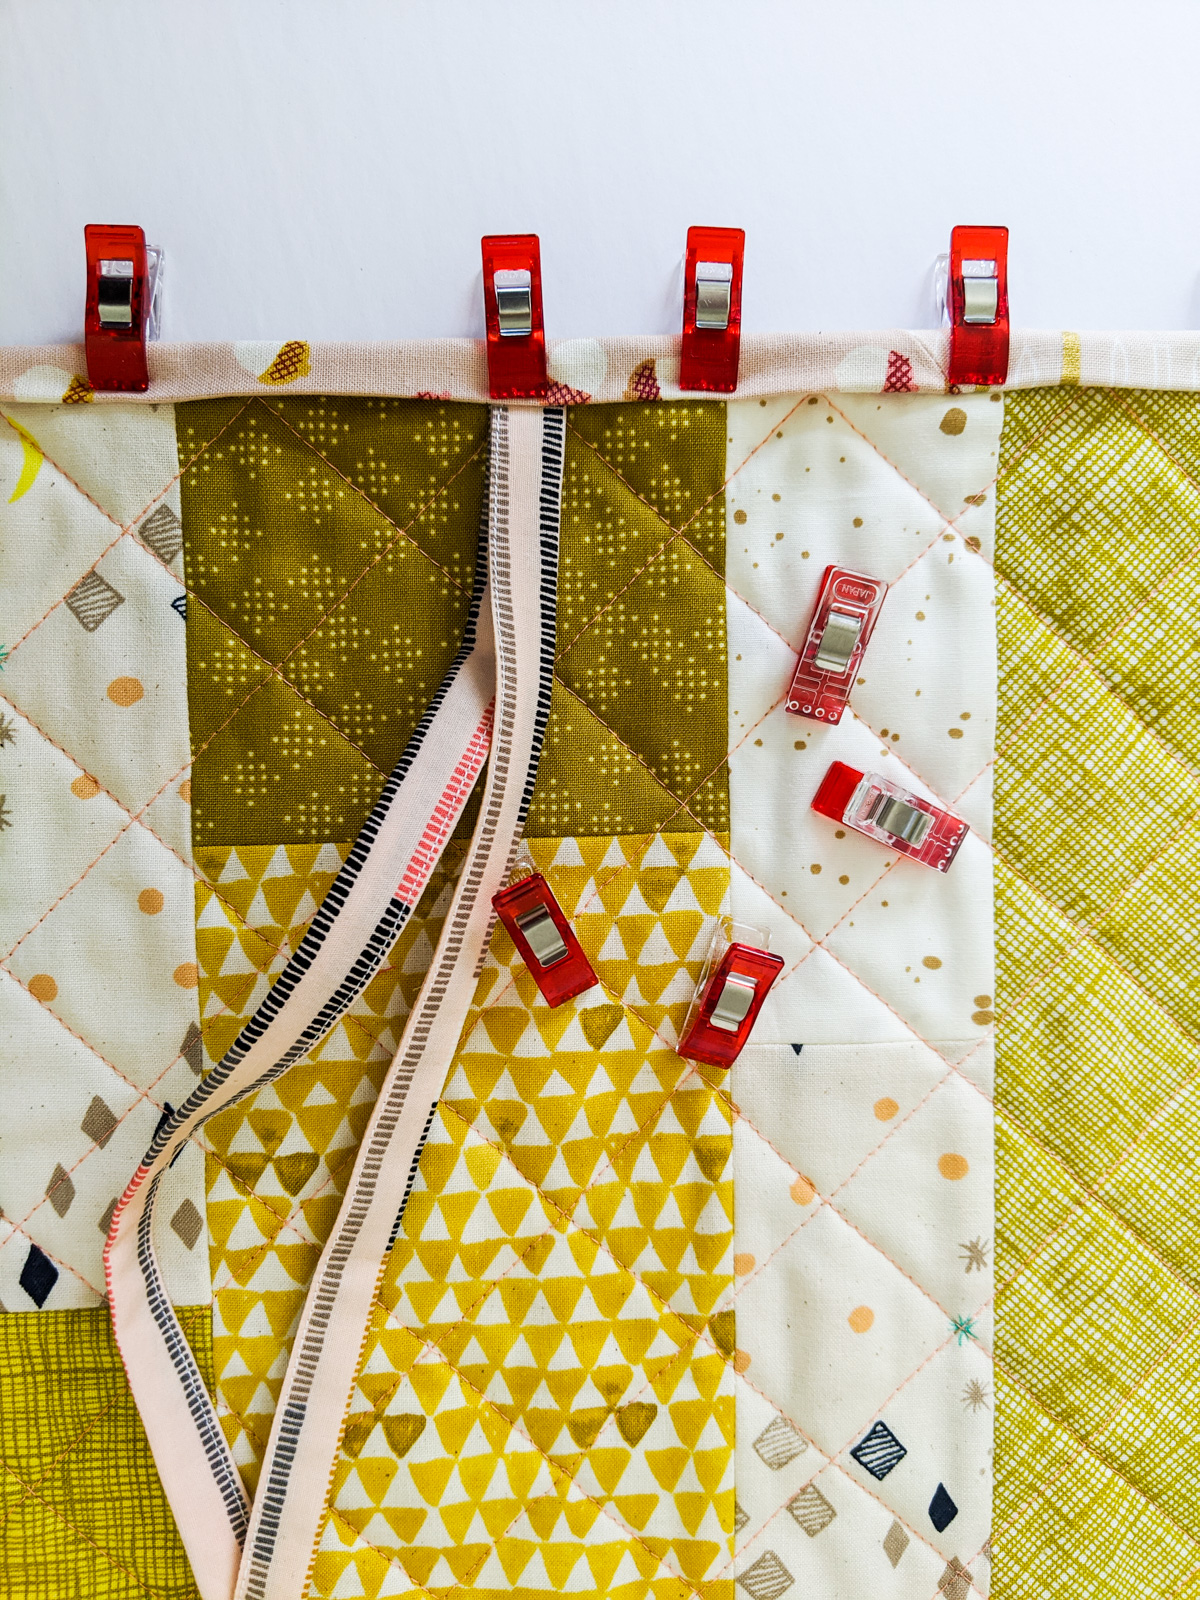 This DIY Quilted Checkerboard is the perfect project for any beginner looking to learn the basics of quilting in a fun, easy project!